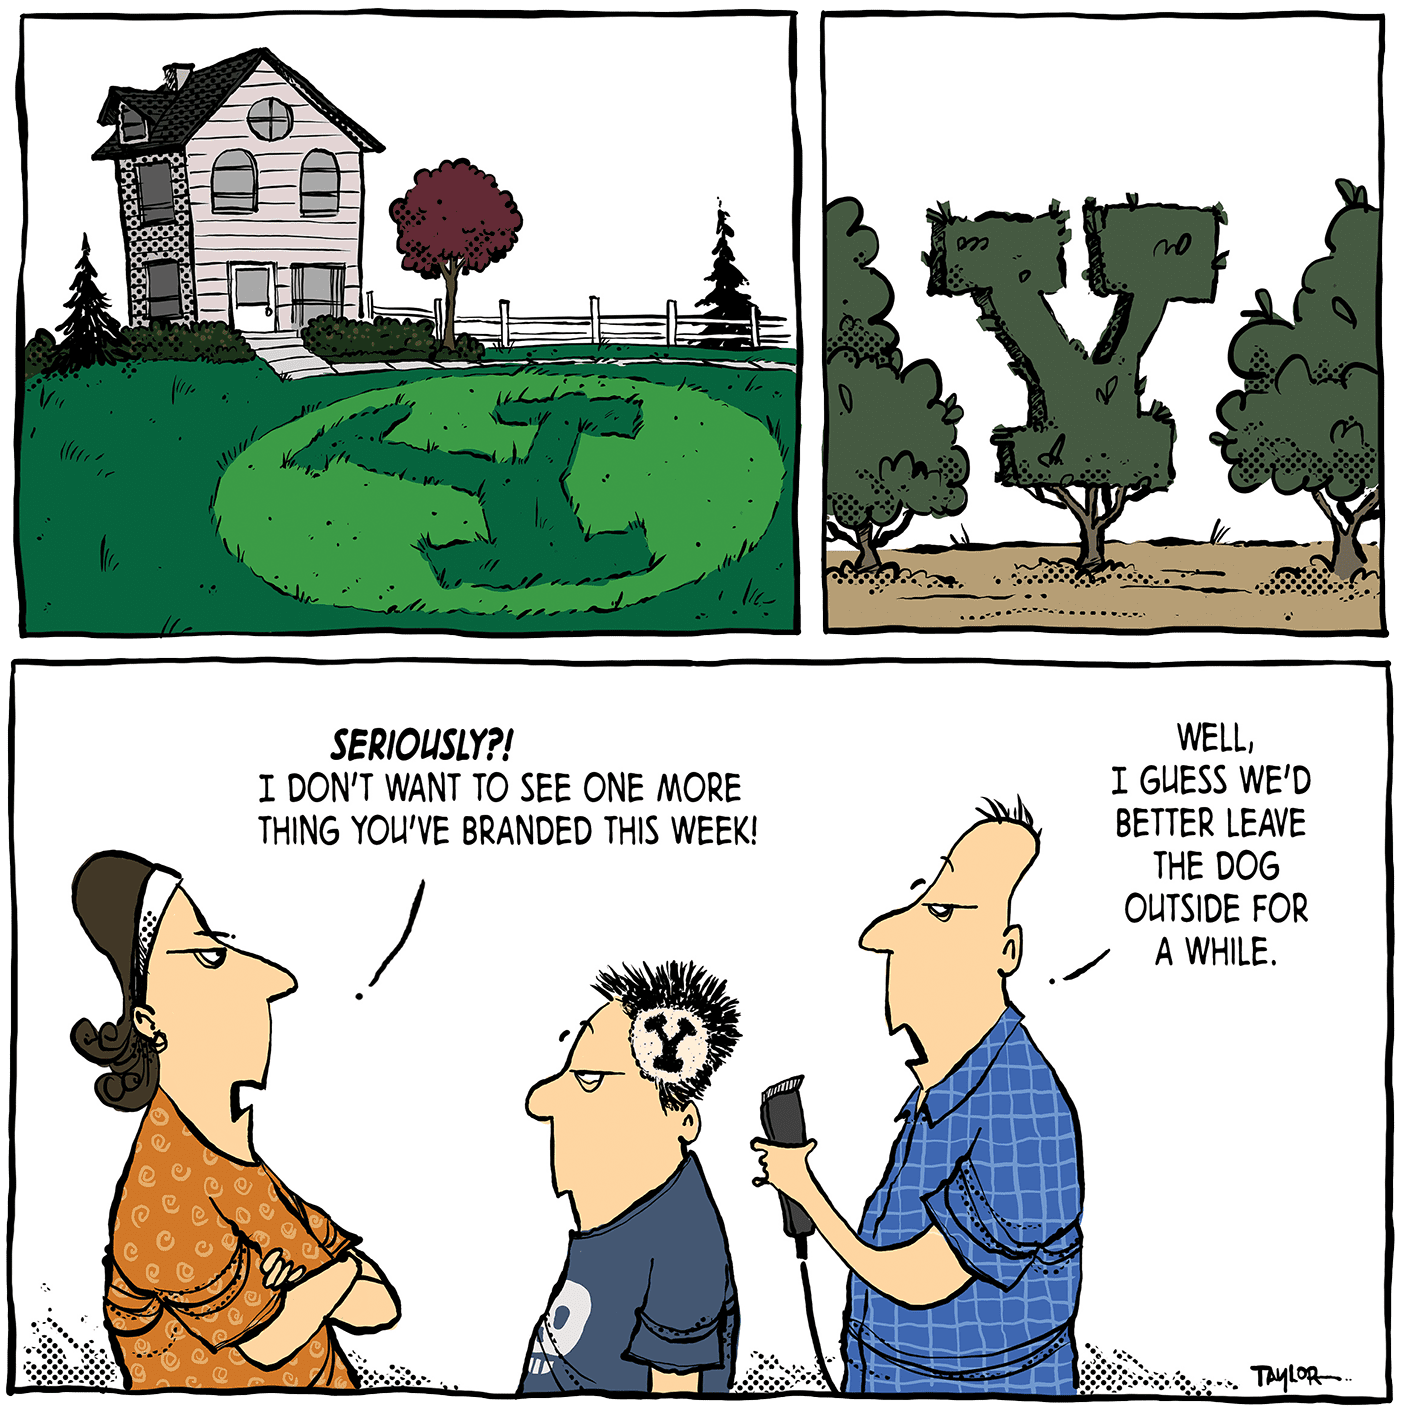 A three panel comic: The first shows a house with a lawn emblazoned with the BYU Y. The second shows a group of trees, the middle one cut into the shape of a Y. The last panel shows a mom, a disgruntled son with a Y cut into his hair, and a dad holding a razor. The mom says "Seriously?! I don't want to see one more thing you've branded this week!" The dad replies, "Well I guess we'd better leave the dog outside for a while."